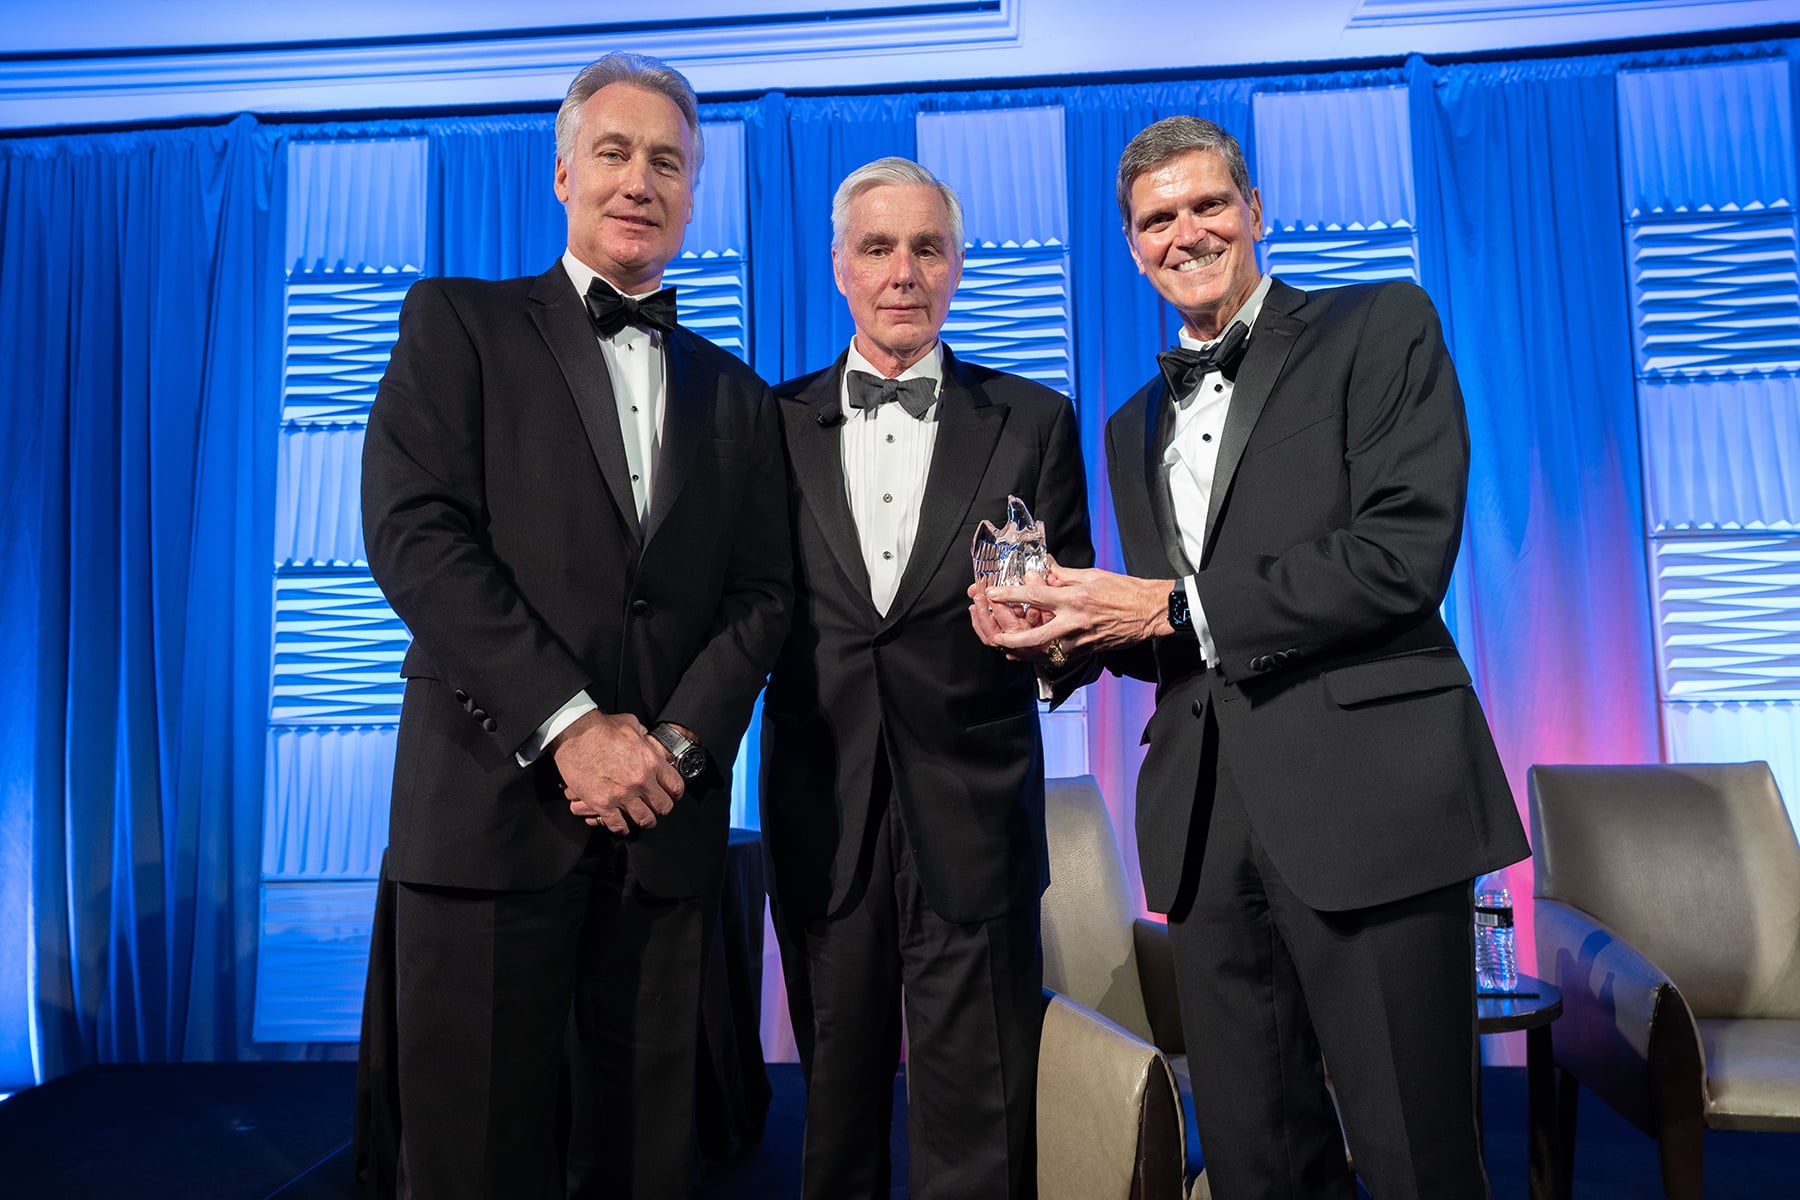 William Flynn (center) is presented with the Eisenhower Award.